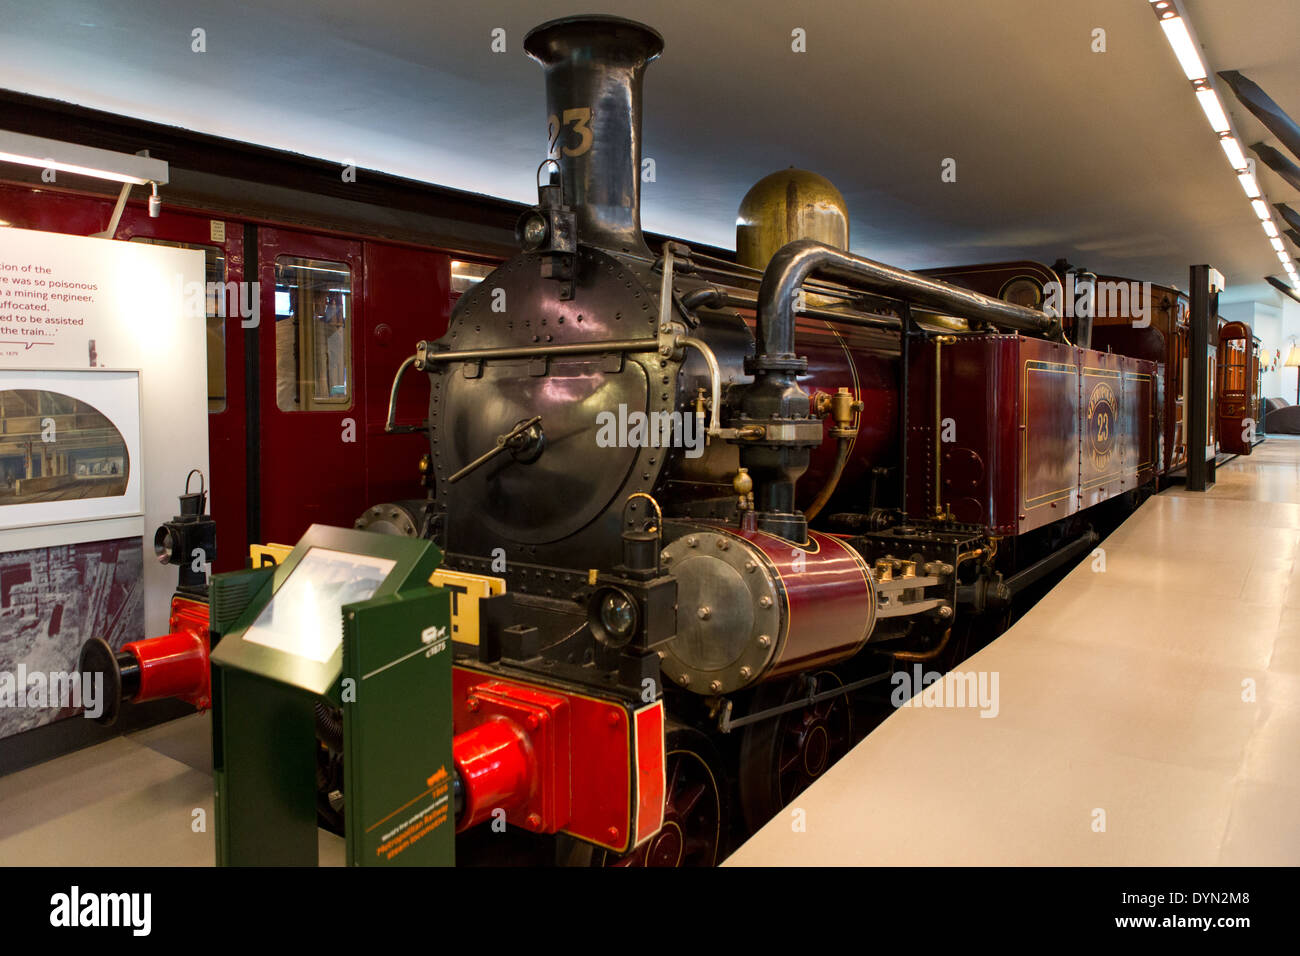 London Transport Museum In Covent Garden. Stock Photo